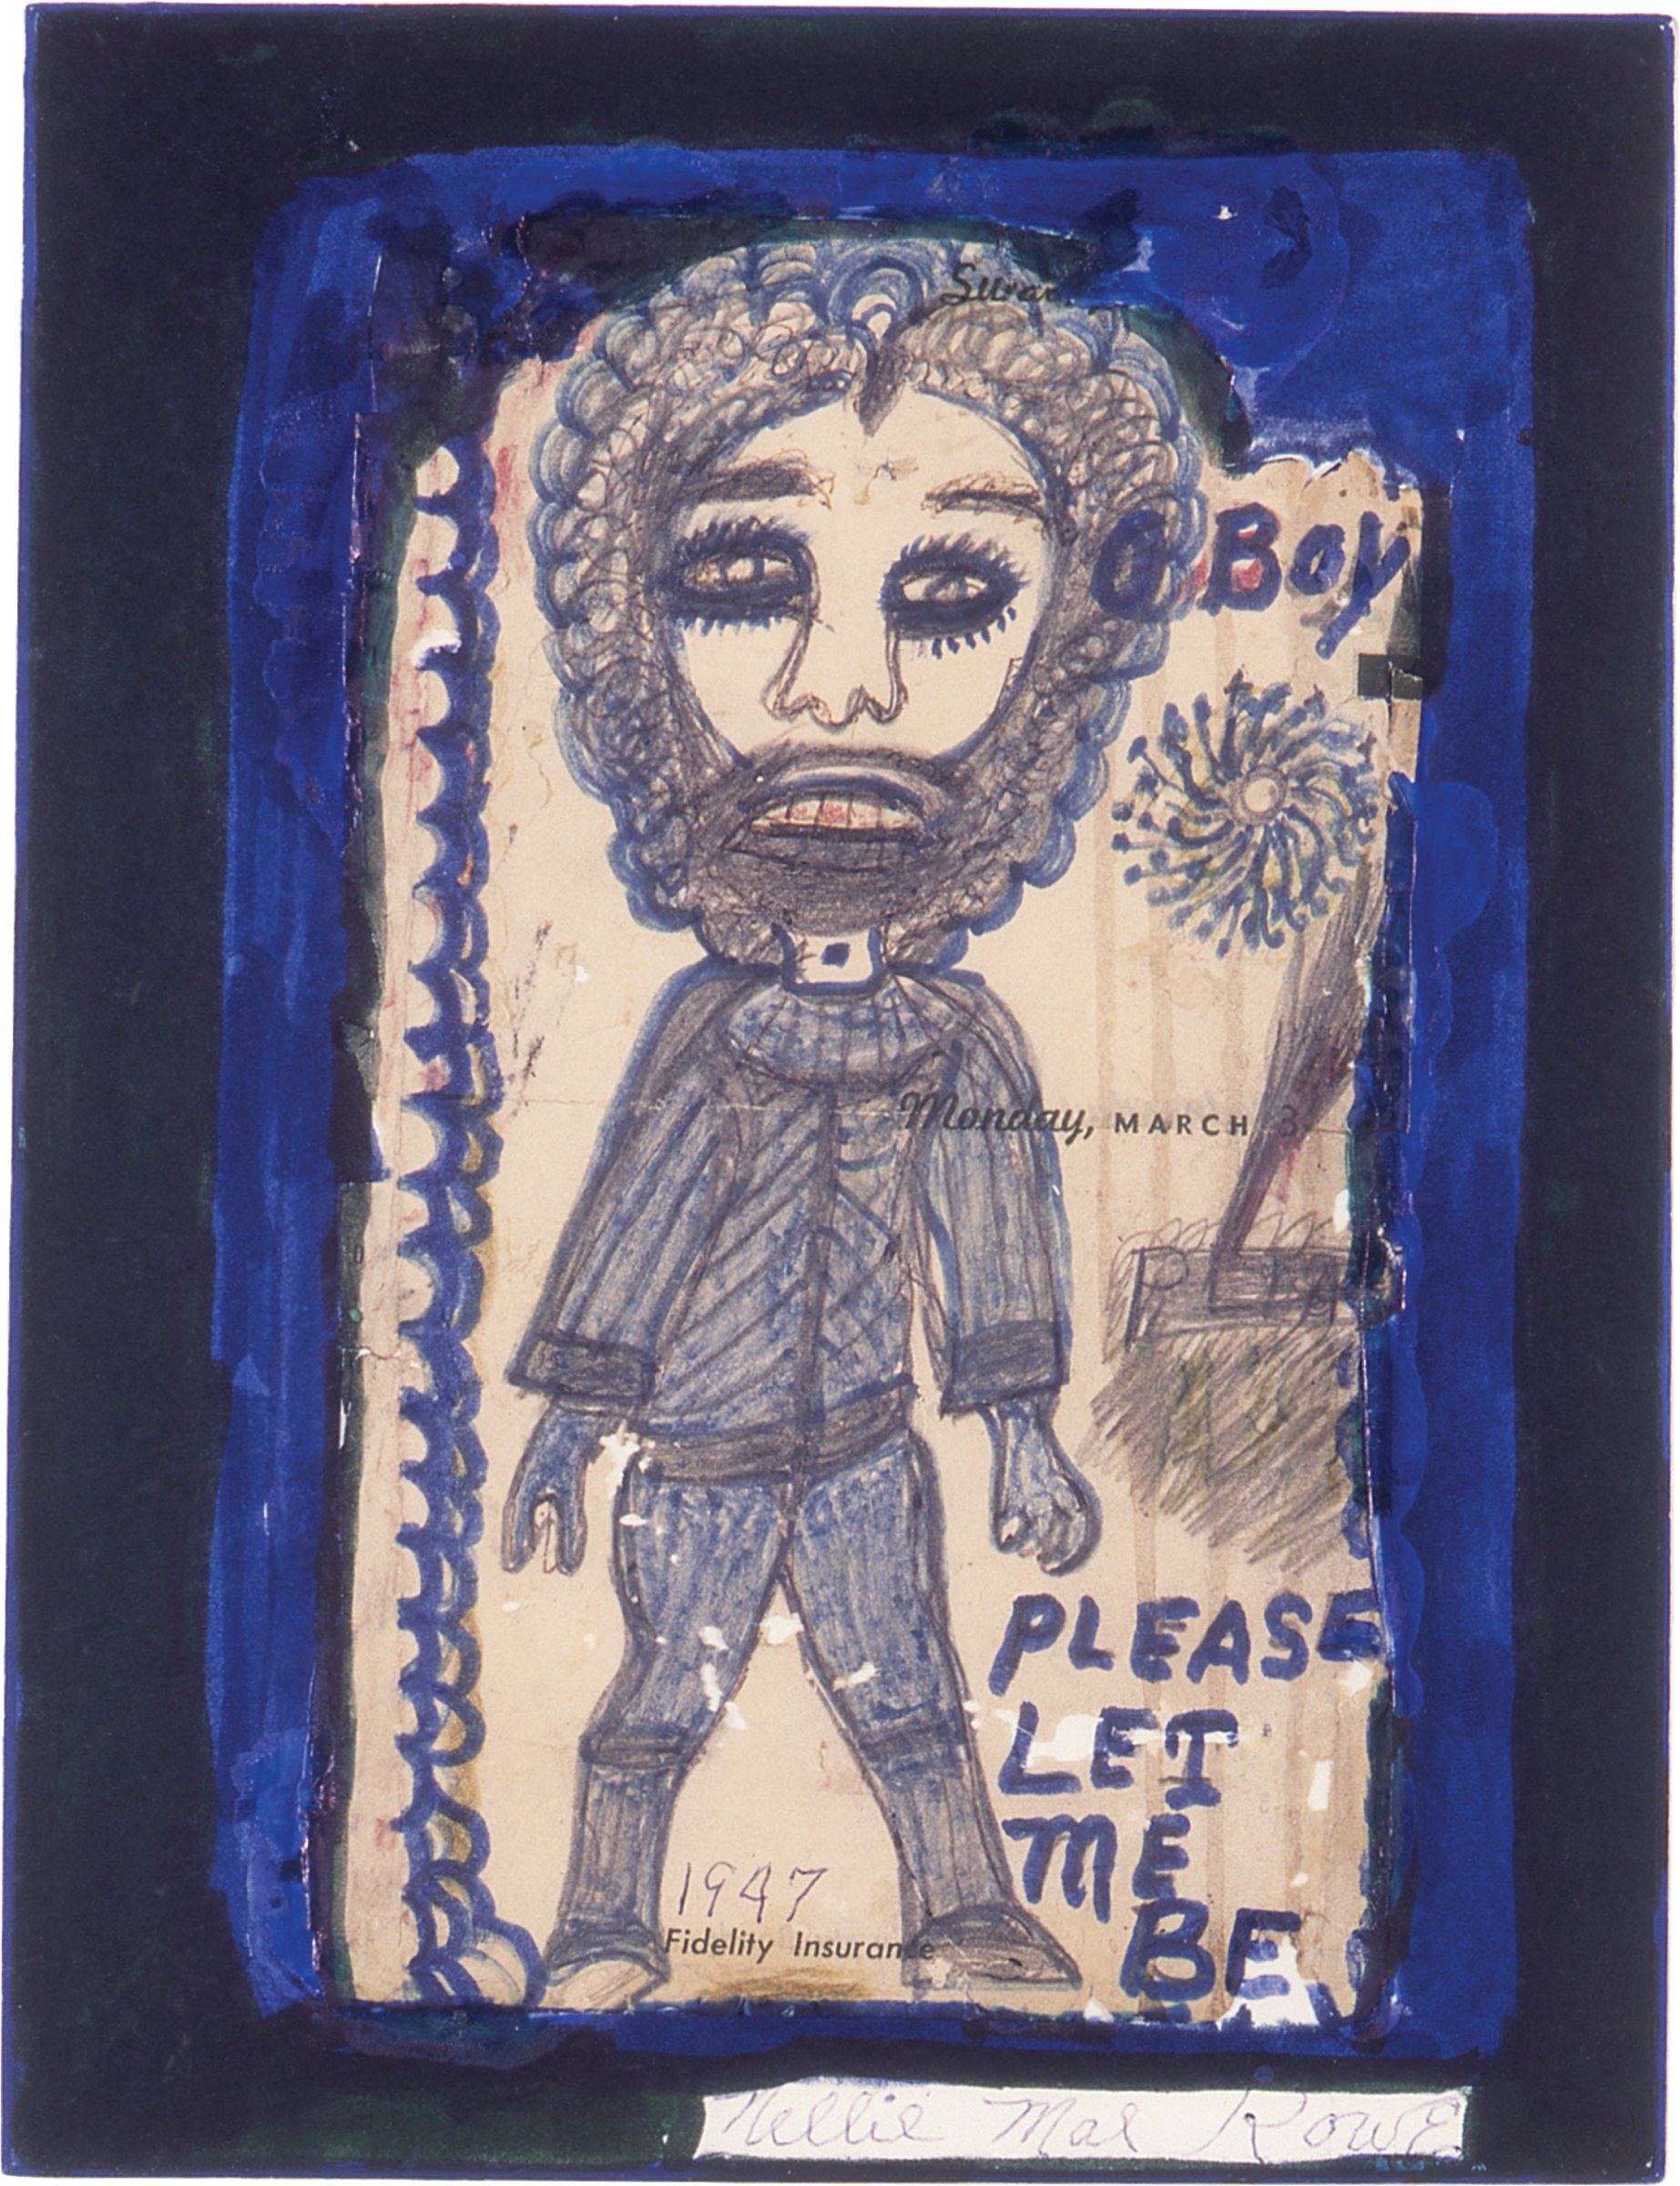 A front-facing figure drawn with pencil and blue marker against a white background with blue and black borders; “boy” and “please let me be” written in marker.